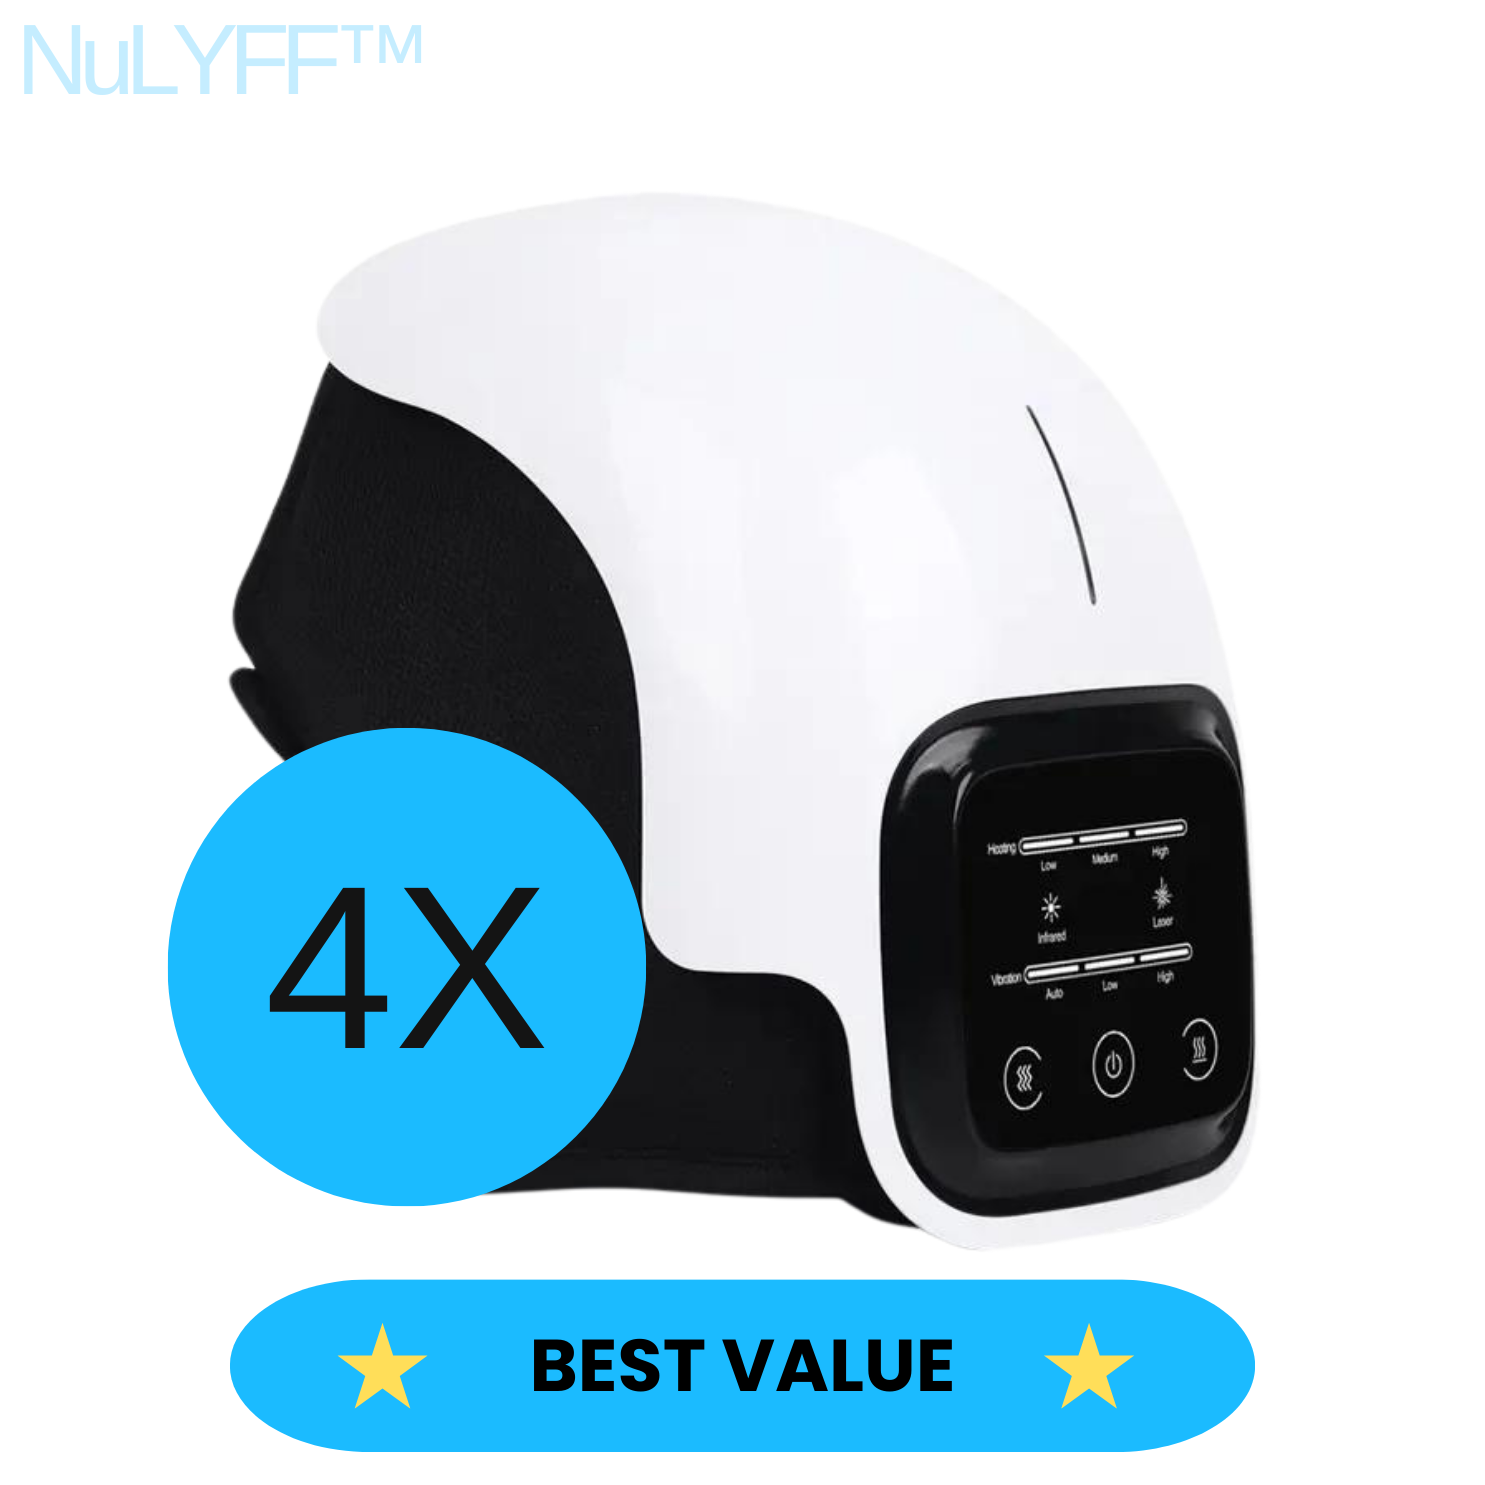 Image of 4X four units NuLYFF™ Knee Massager - Best Value, free shipping, 30 day money back guarantee, and Free mystery gift